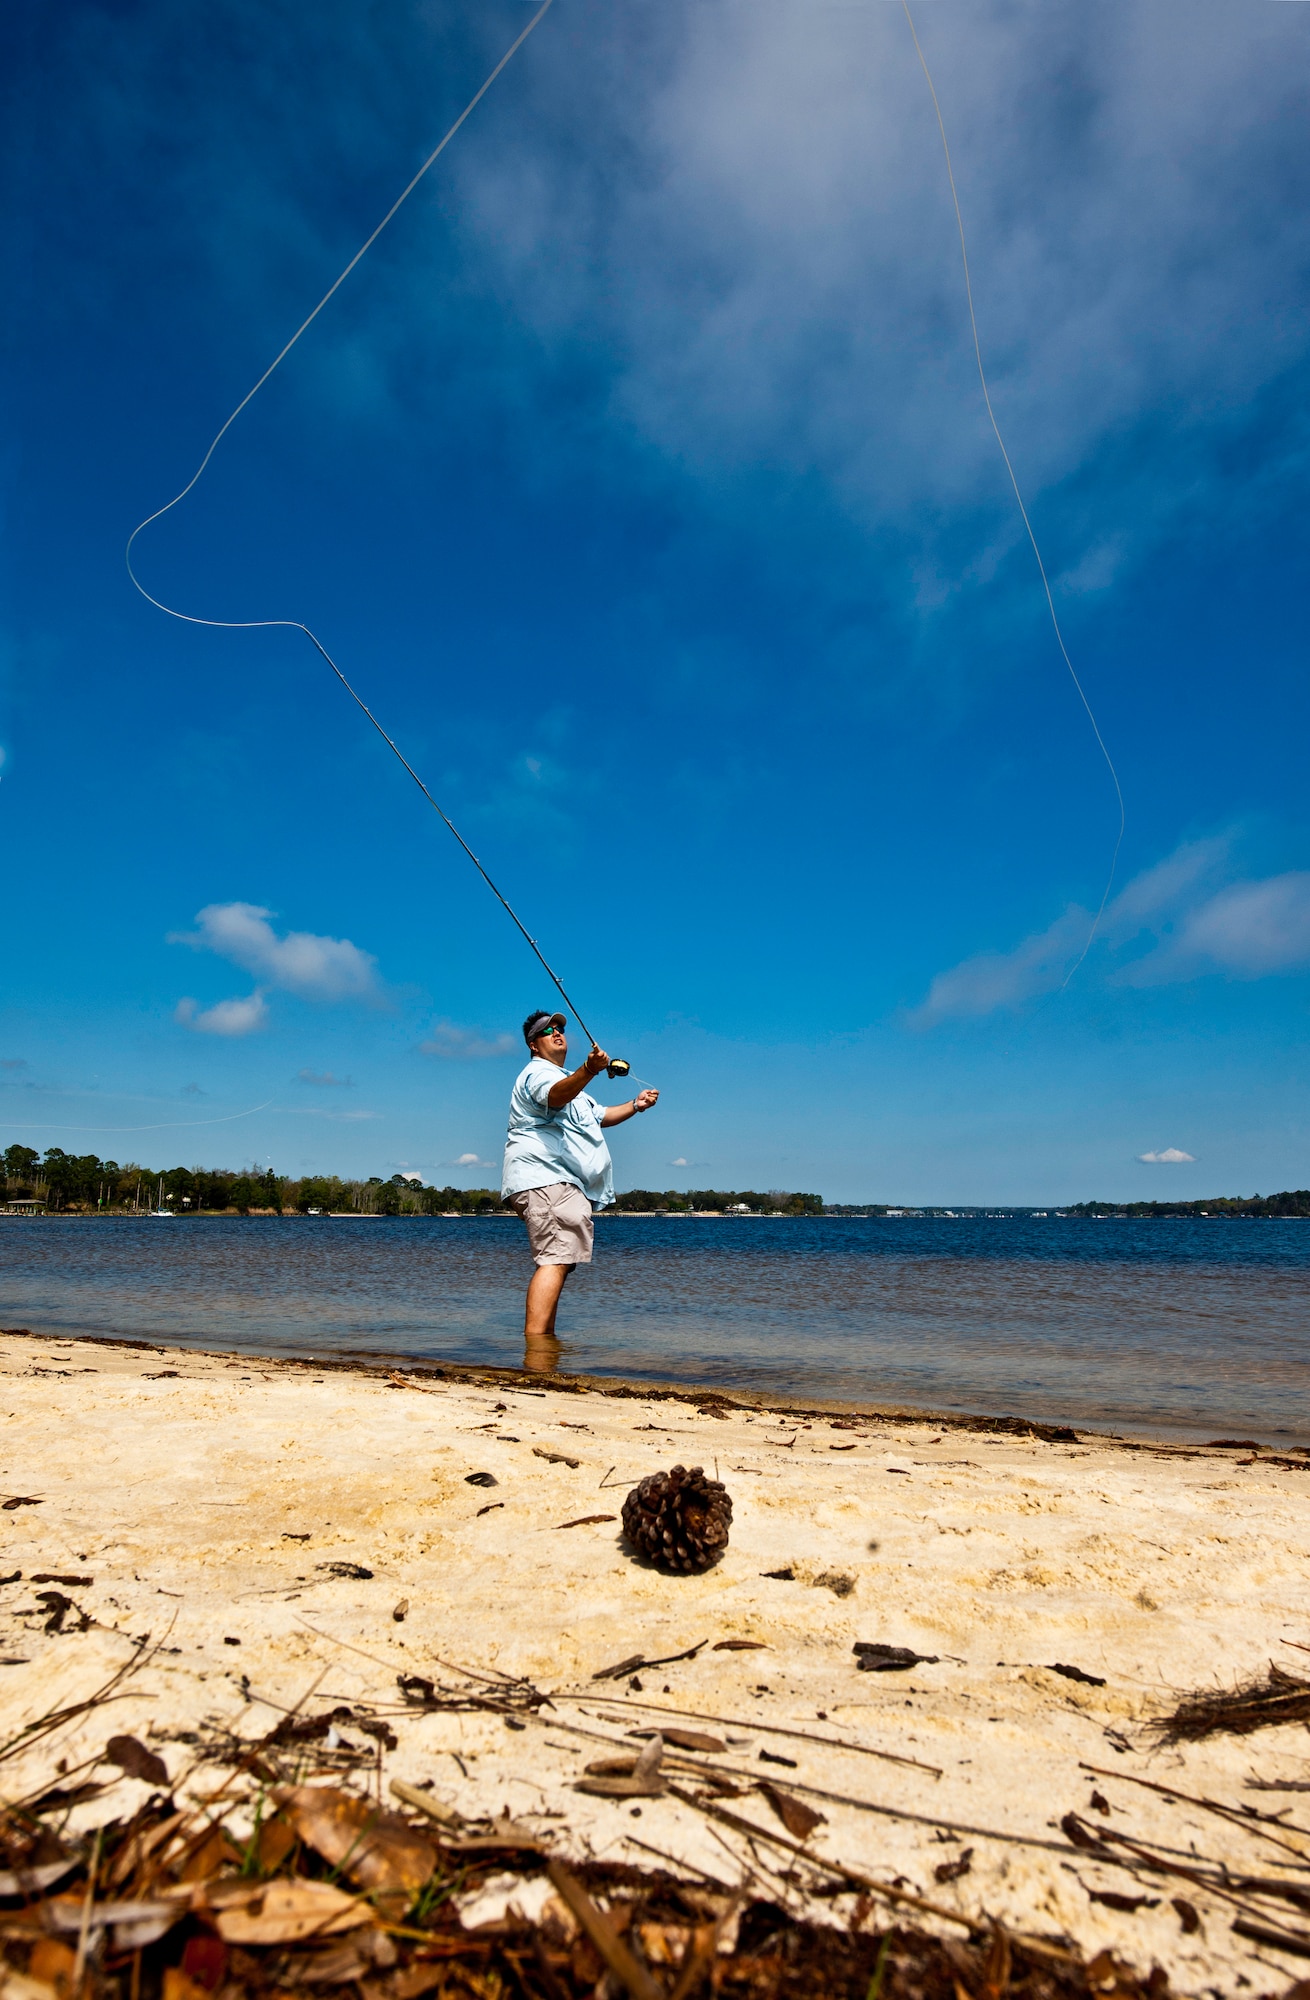 Fly fishing class taught at Eglin > Eglin Air Force Base > News